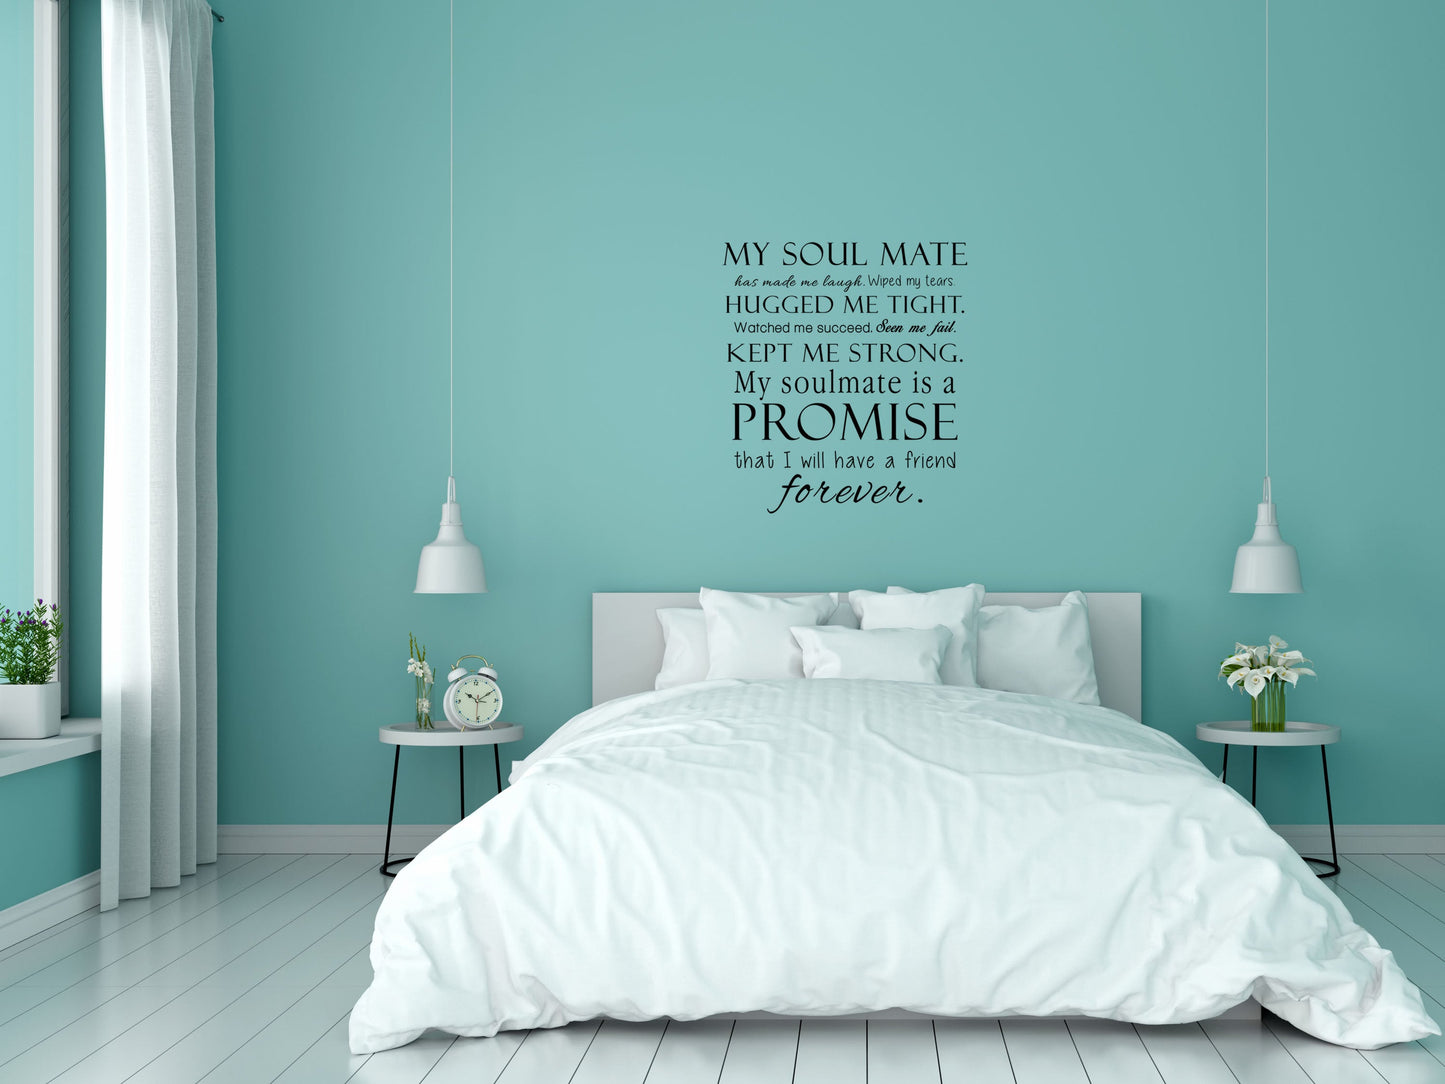 My Soulmate Romantic - Inspirational Wall Decals Vinyl Wall Decal Inspirational Wall Signs 